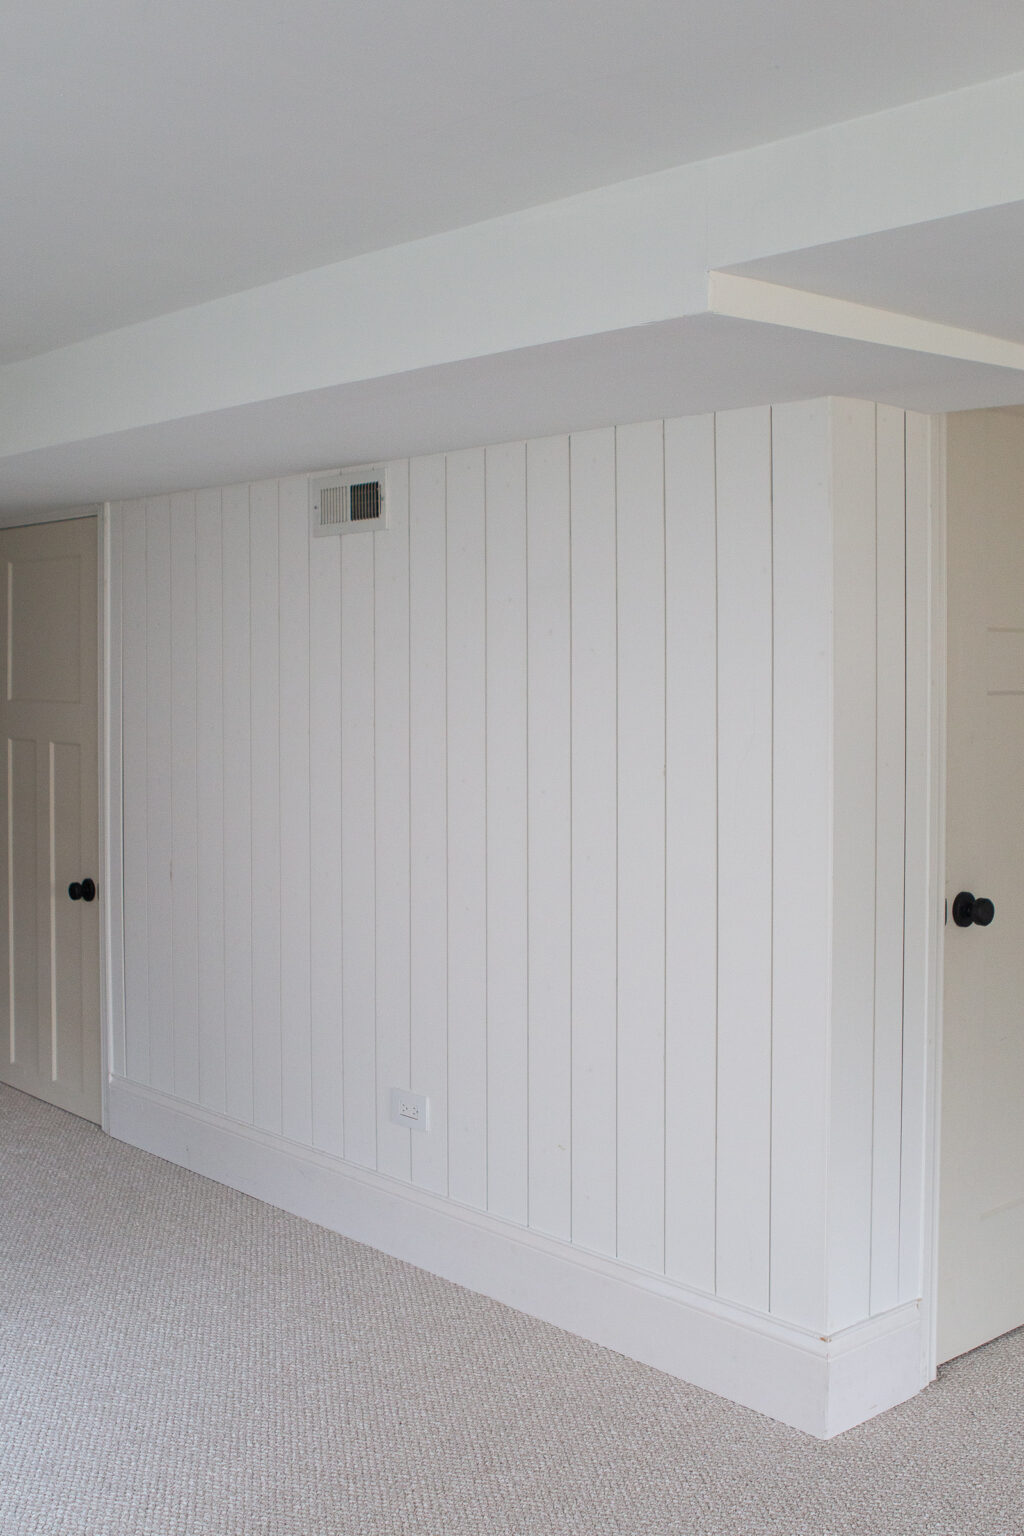 How to add vertical shiplap